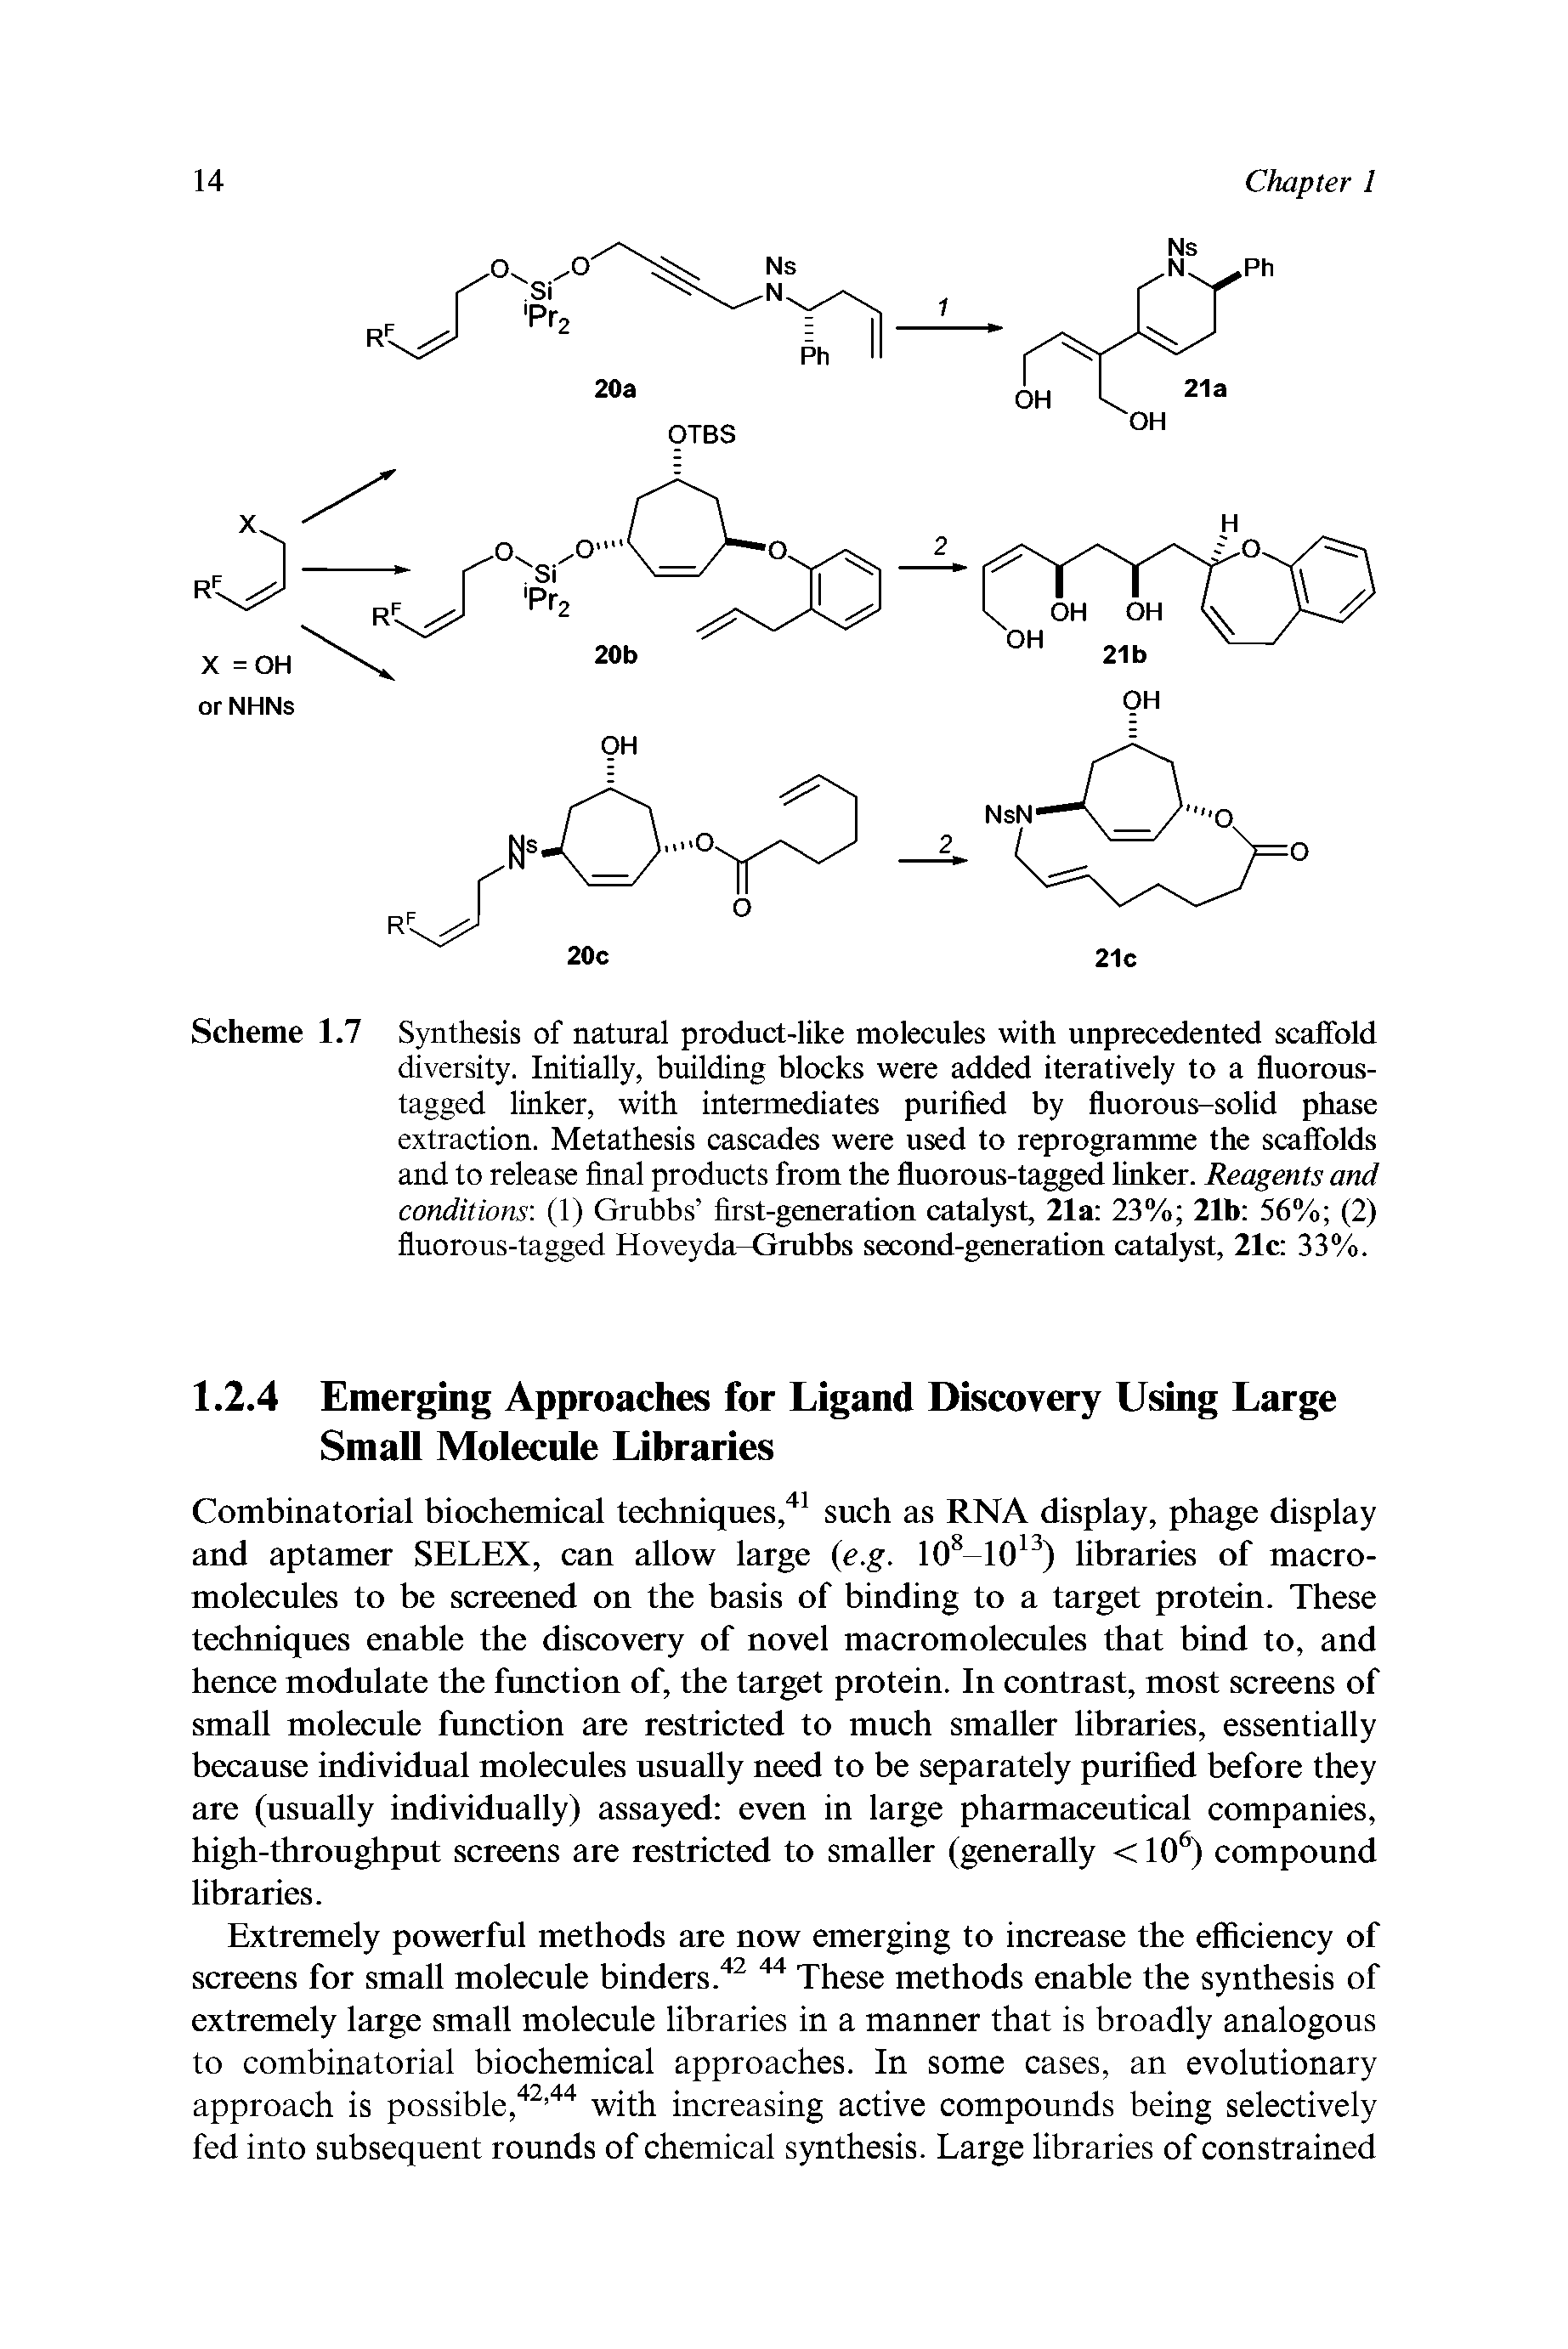 Scheme 1.7 Synthesis of natural product-like molecules with unprecedented scaffold diversity. Initially, building blocks were added iteratively to a fluorous-tagged linker, with intermediates purified by fluorous-solid phase extraction. Metathesis cascades were used to reprogramme the scaffolds and to release final products from the fluorous-tagged linker. Reagents and conditions. (1) Grubbs first-generation catalyst, 21a 23% 21b 56% (2) fluorous-tagged Hoveyda-Grubbs second-generation eatalyst, 21c 33%.